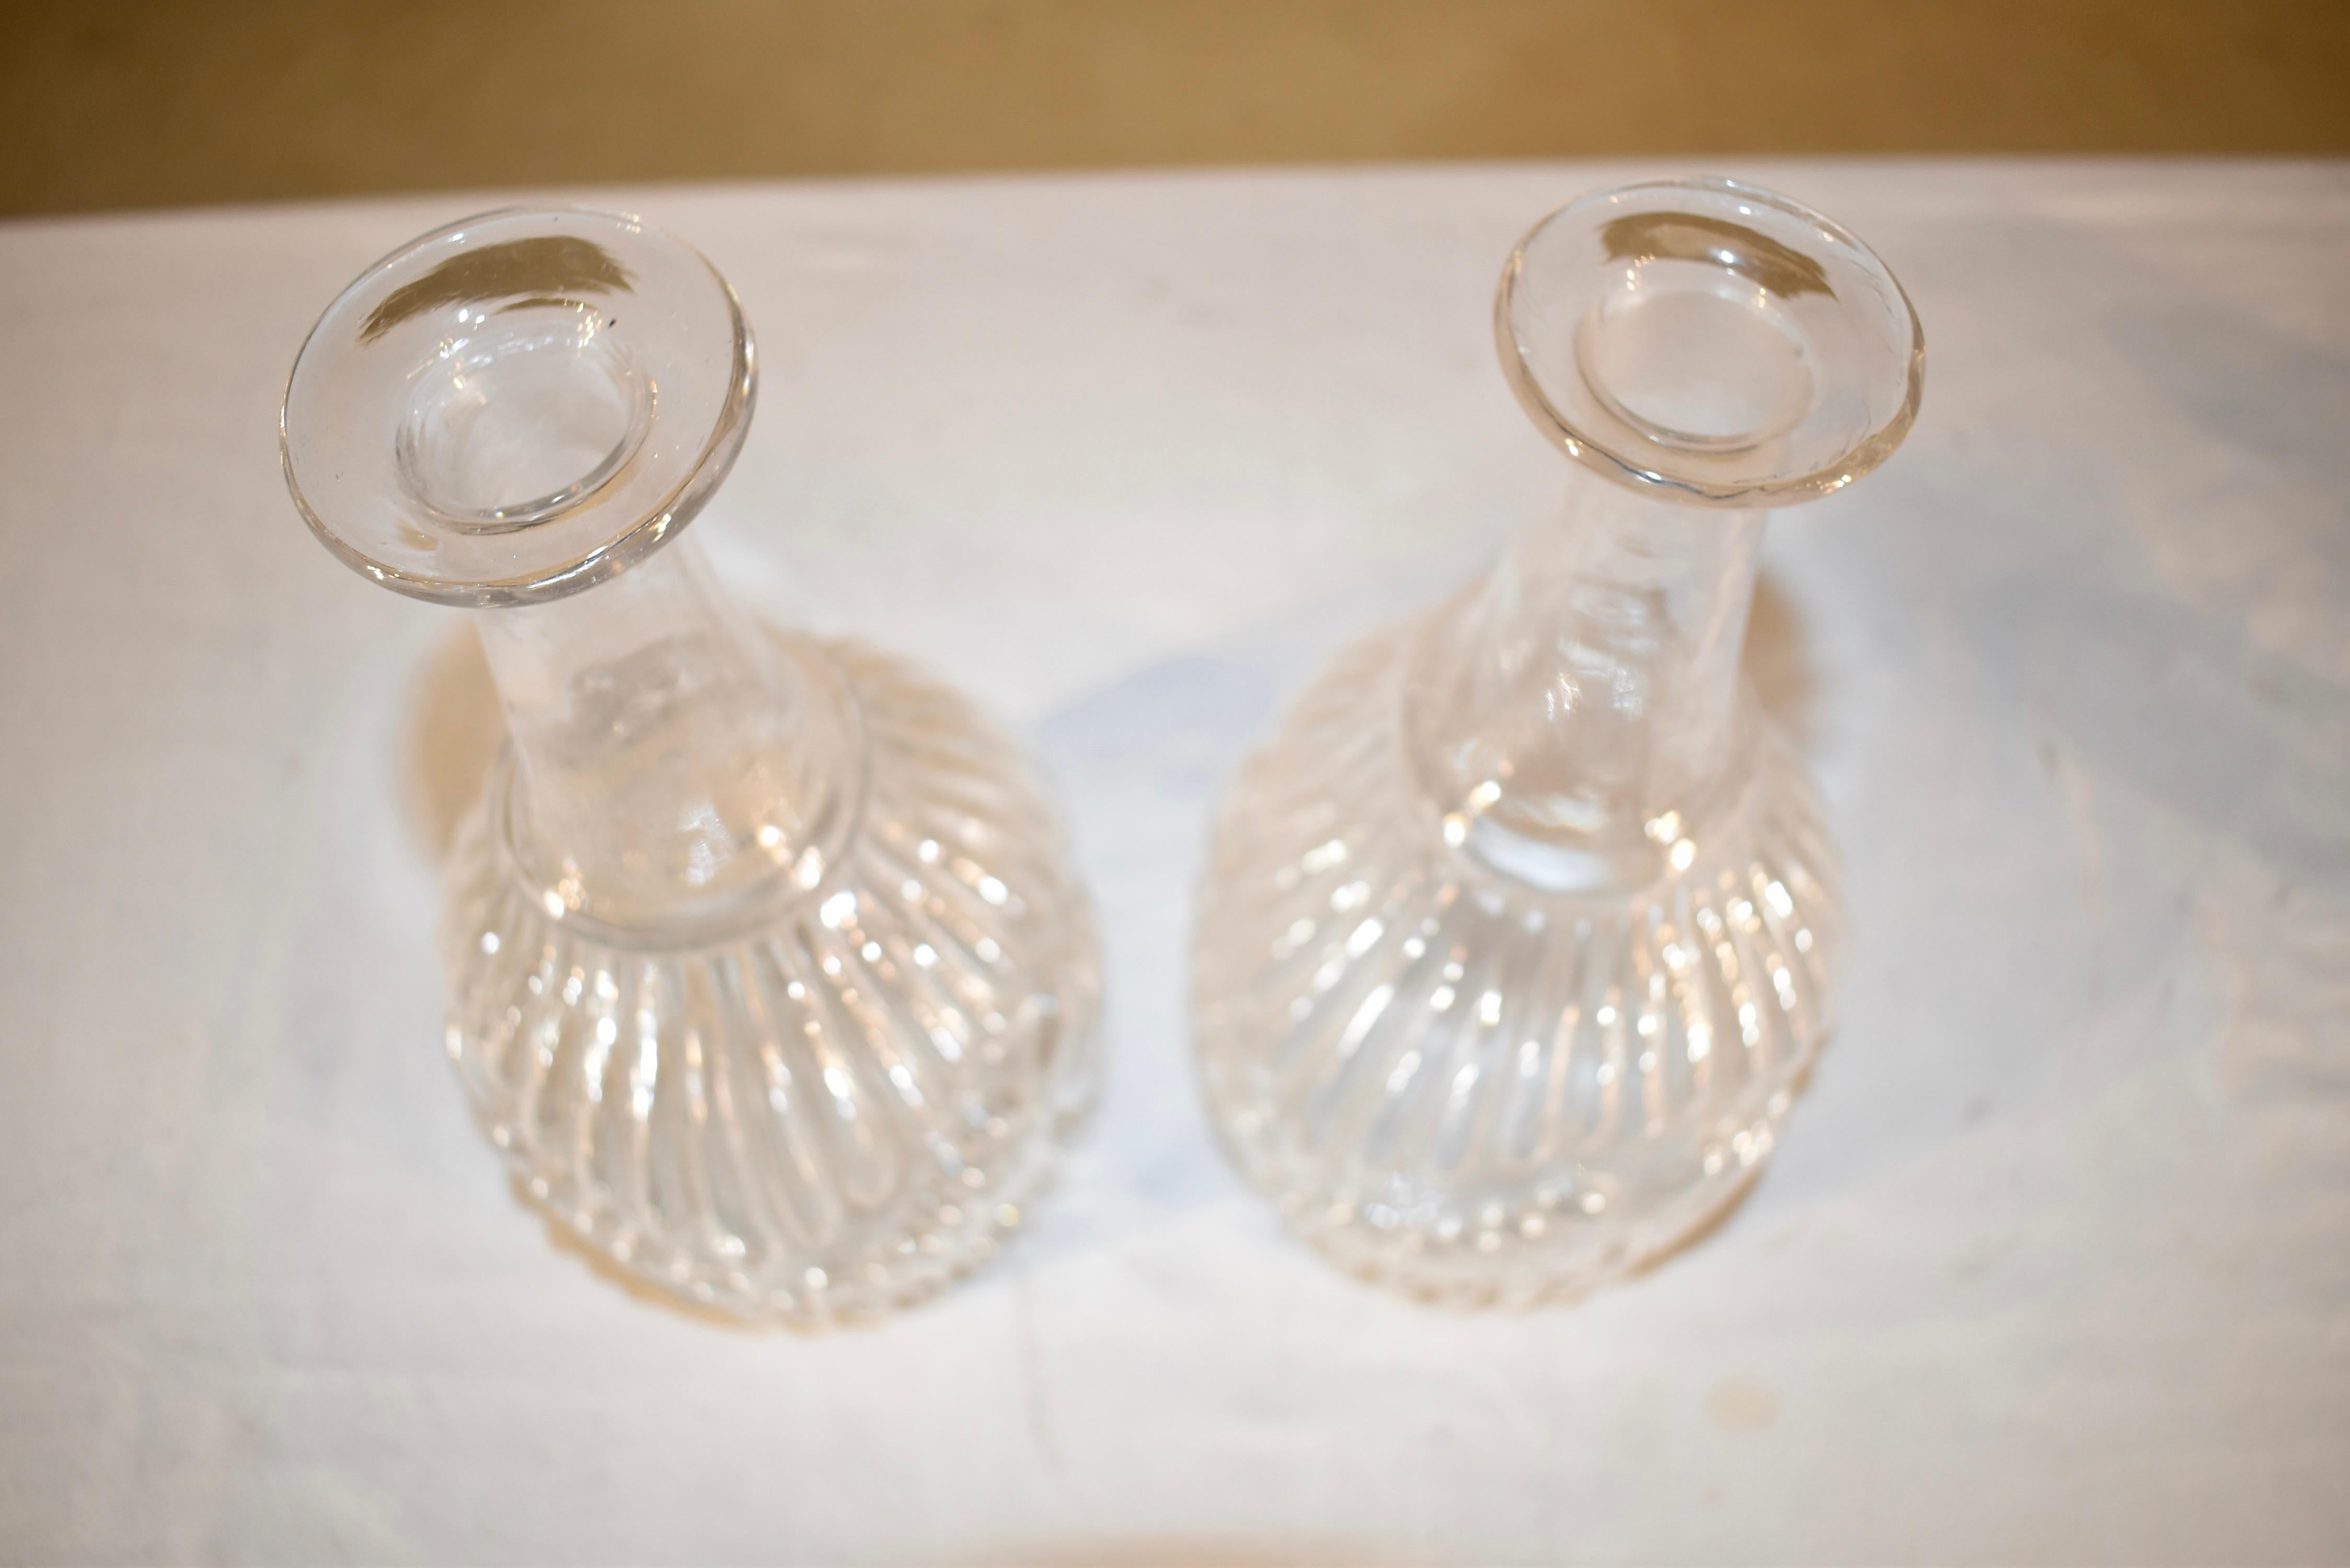 Pair of Early 19th Century American Mold Blown Decanters For Sale 5